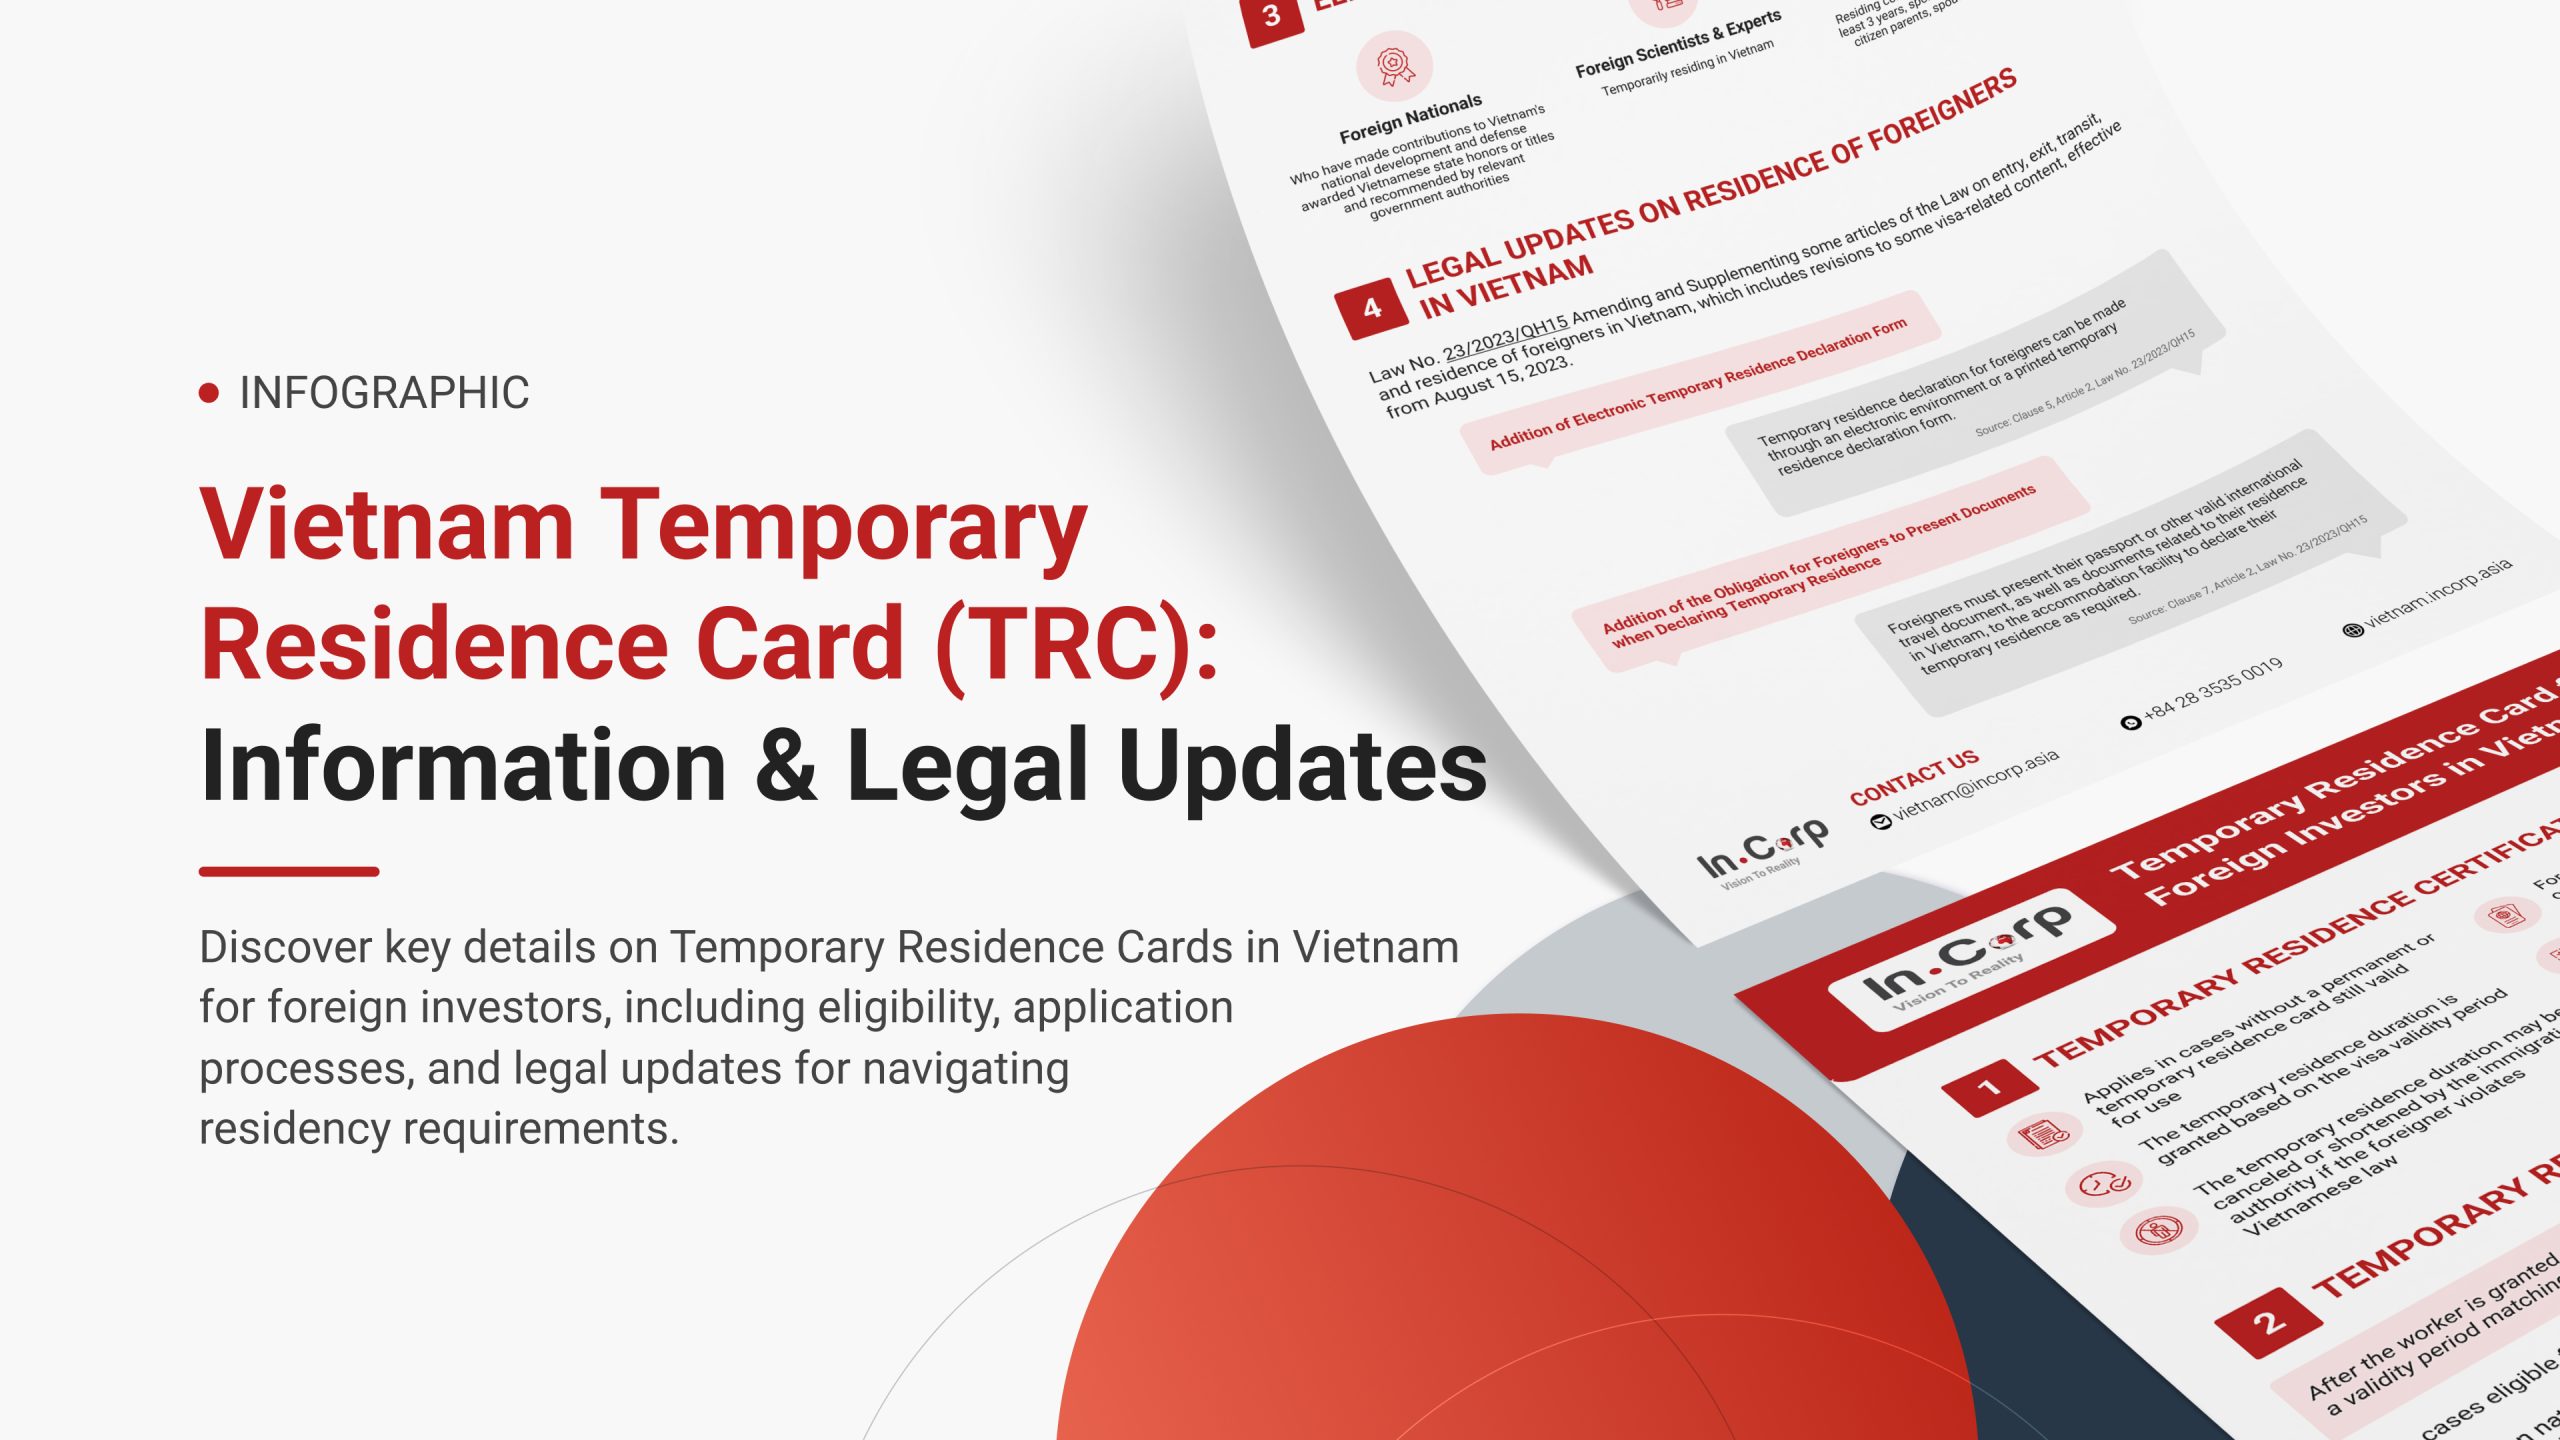 Vietnam Temporary Residence Card (TRC): Information and Legal Updates